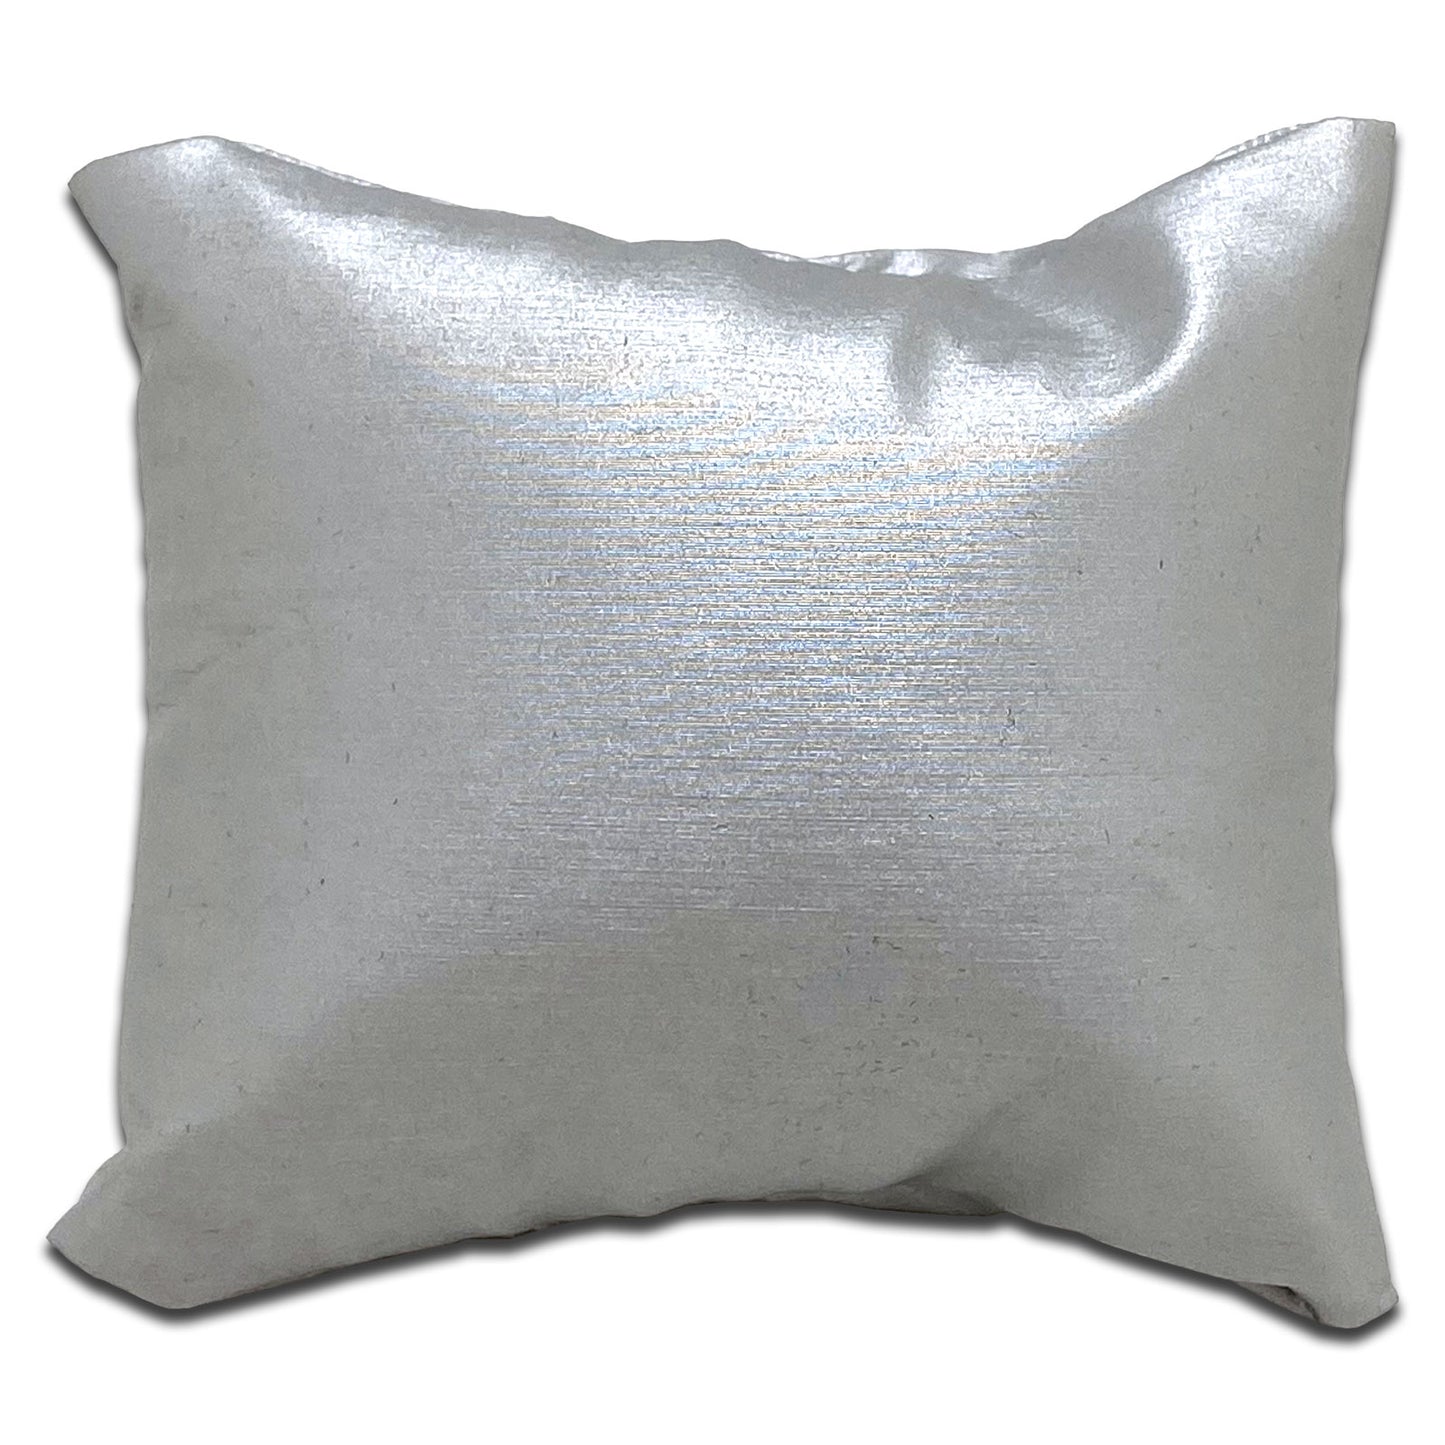 3" x 3" Silver Pillow Jewelry Display for Bracelet or Watch